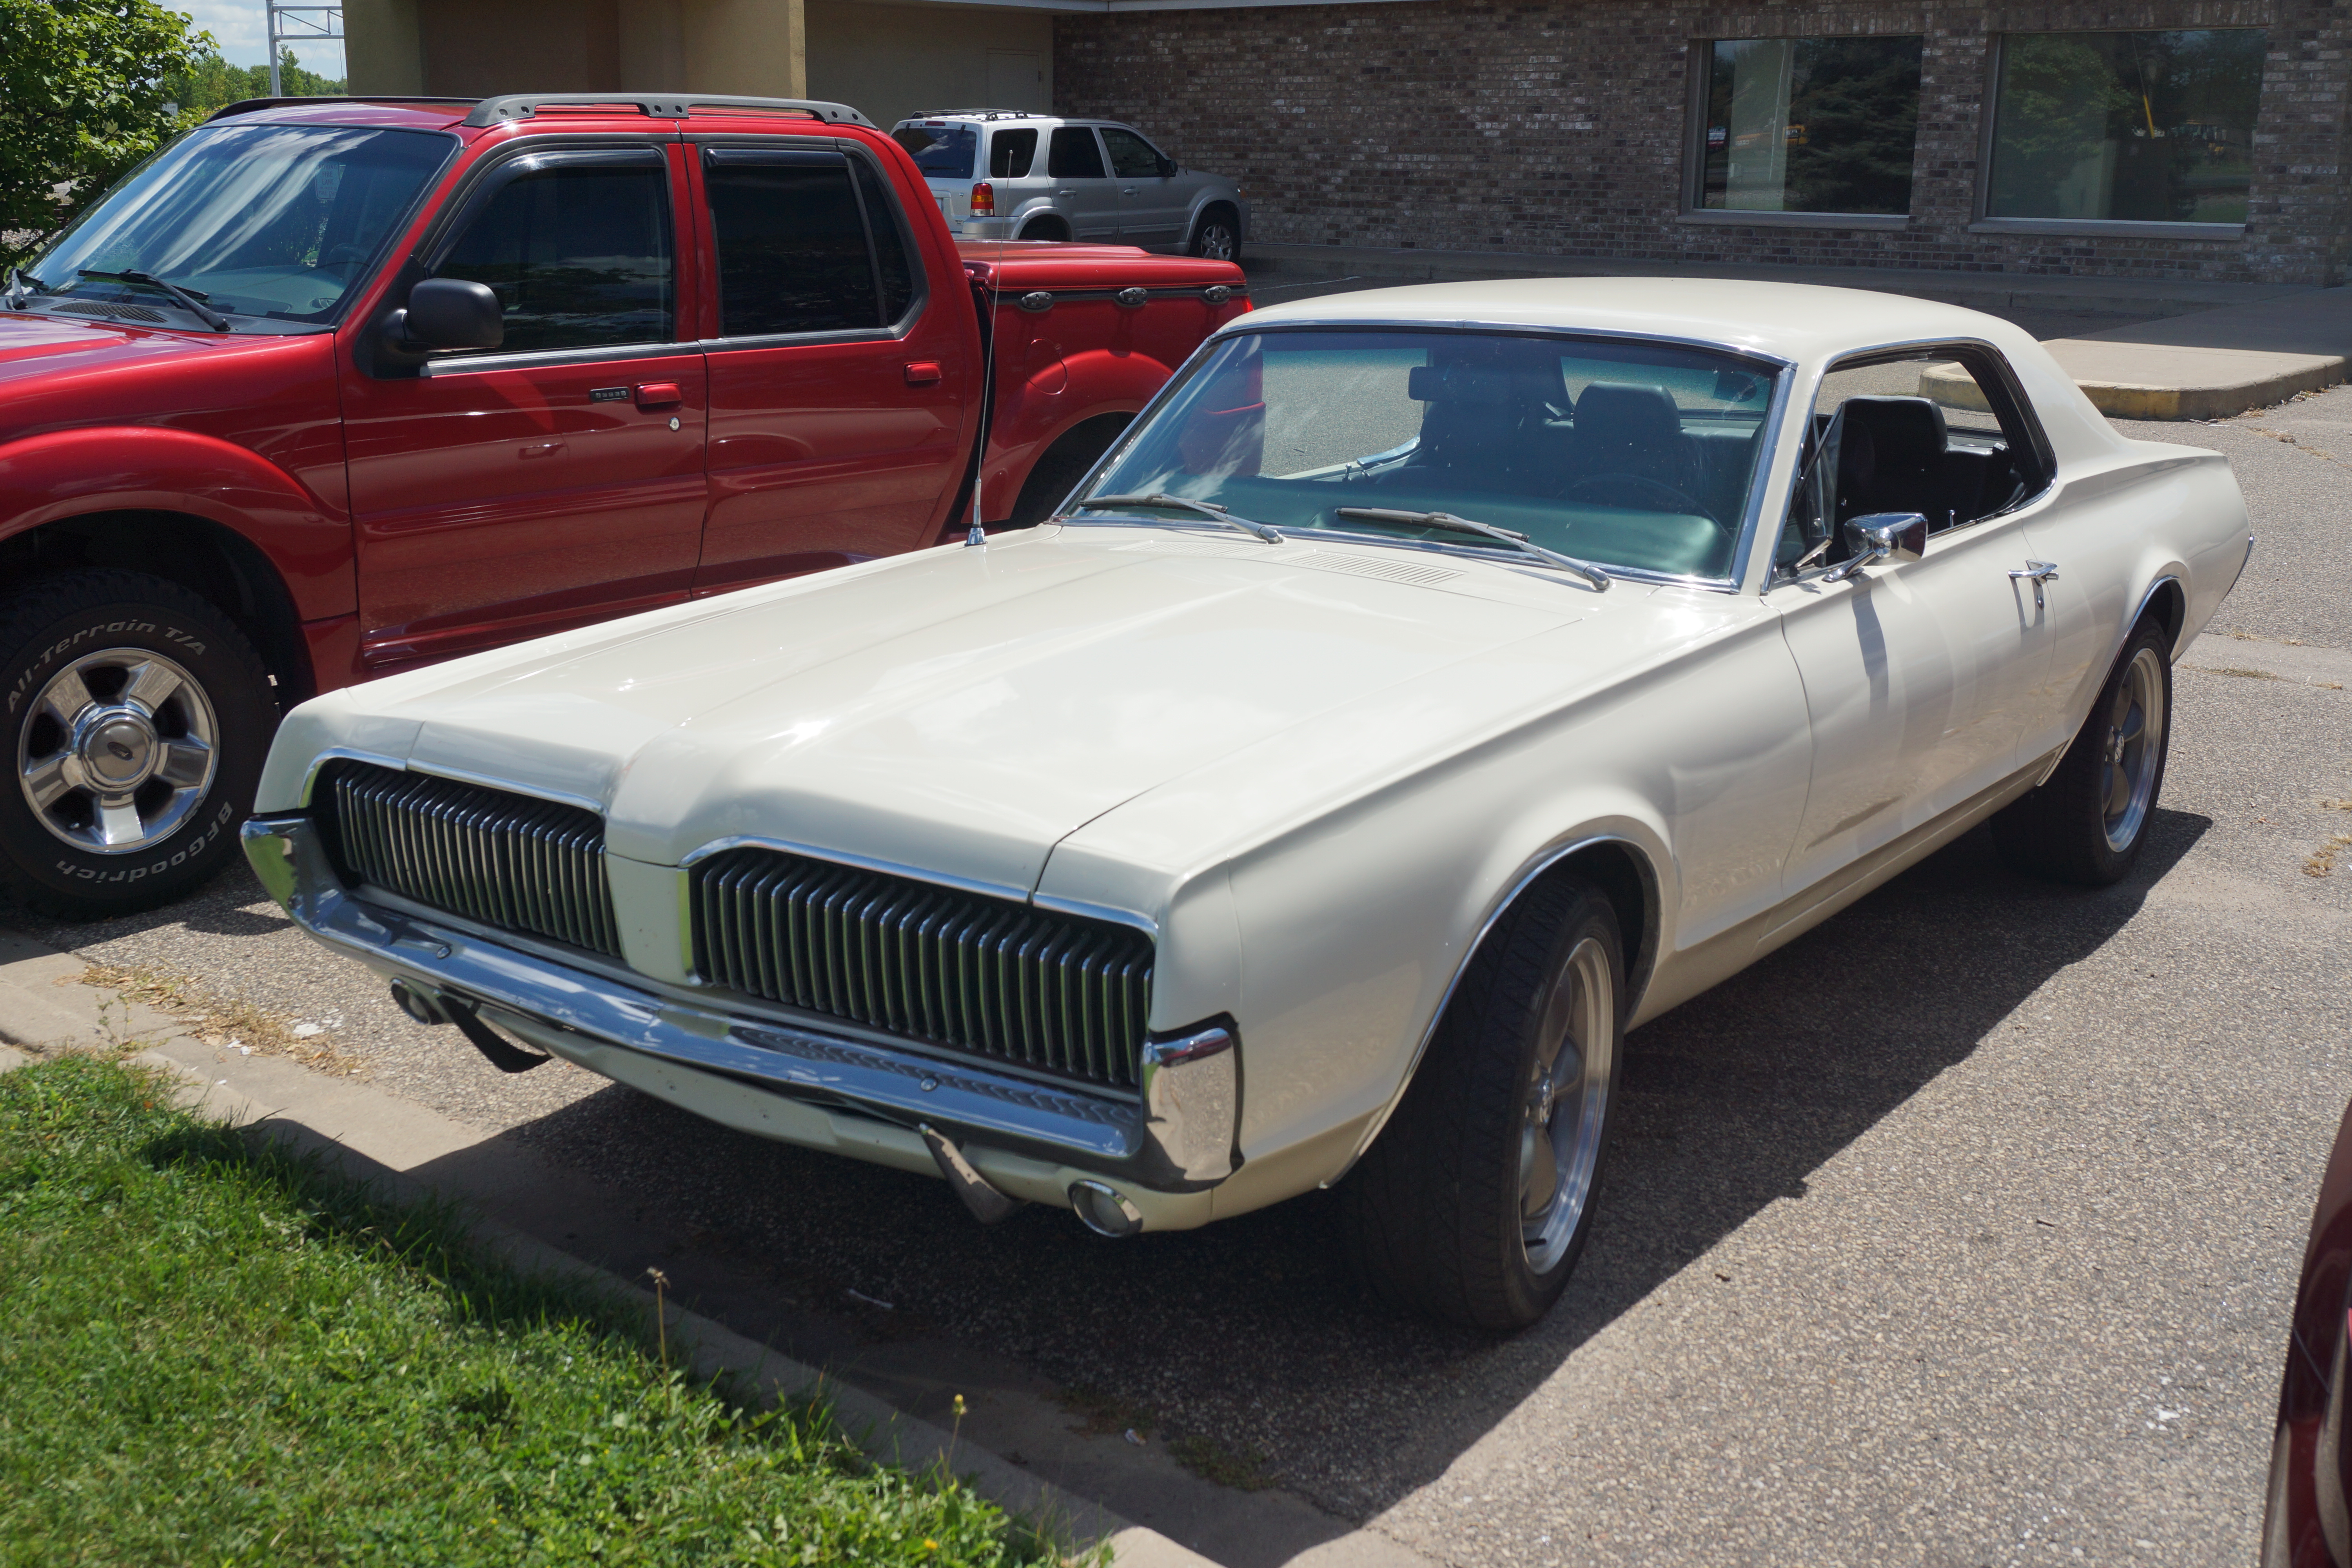 here for more car pictures at my Flickr site. Date 14 August 2016, 12:41 Source 1967 Mercury Cougar Author Greg Gjerdingen from Willmar, USA